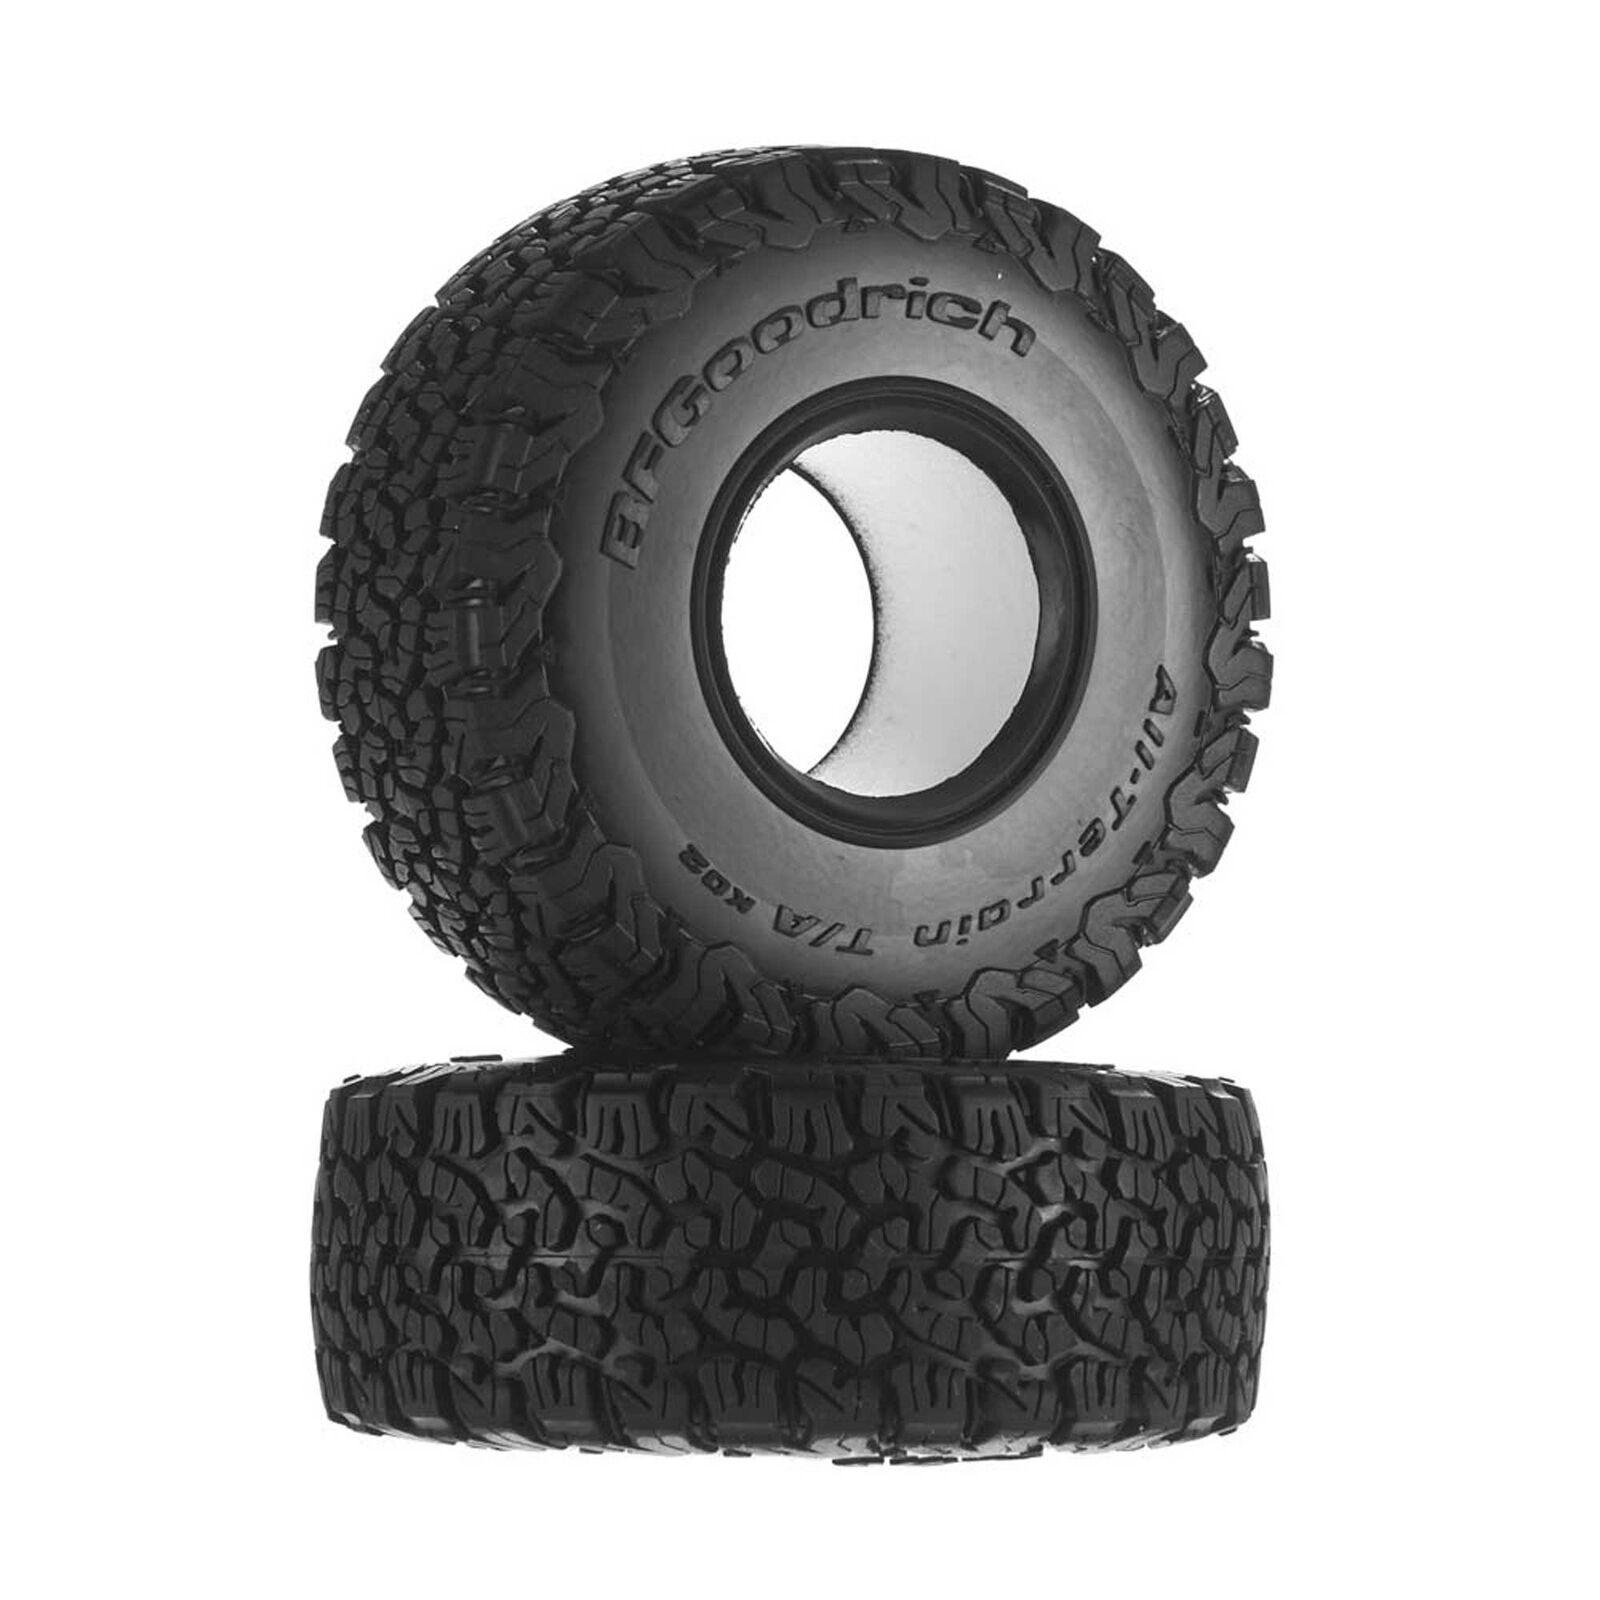 1/10 BF Goodrich All-Terrain T A KO2-R35 1.9 Tire with Inserts (2)